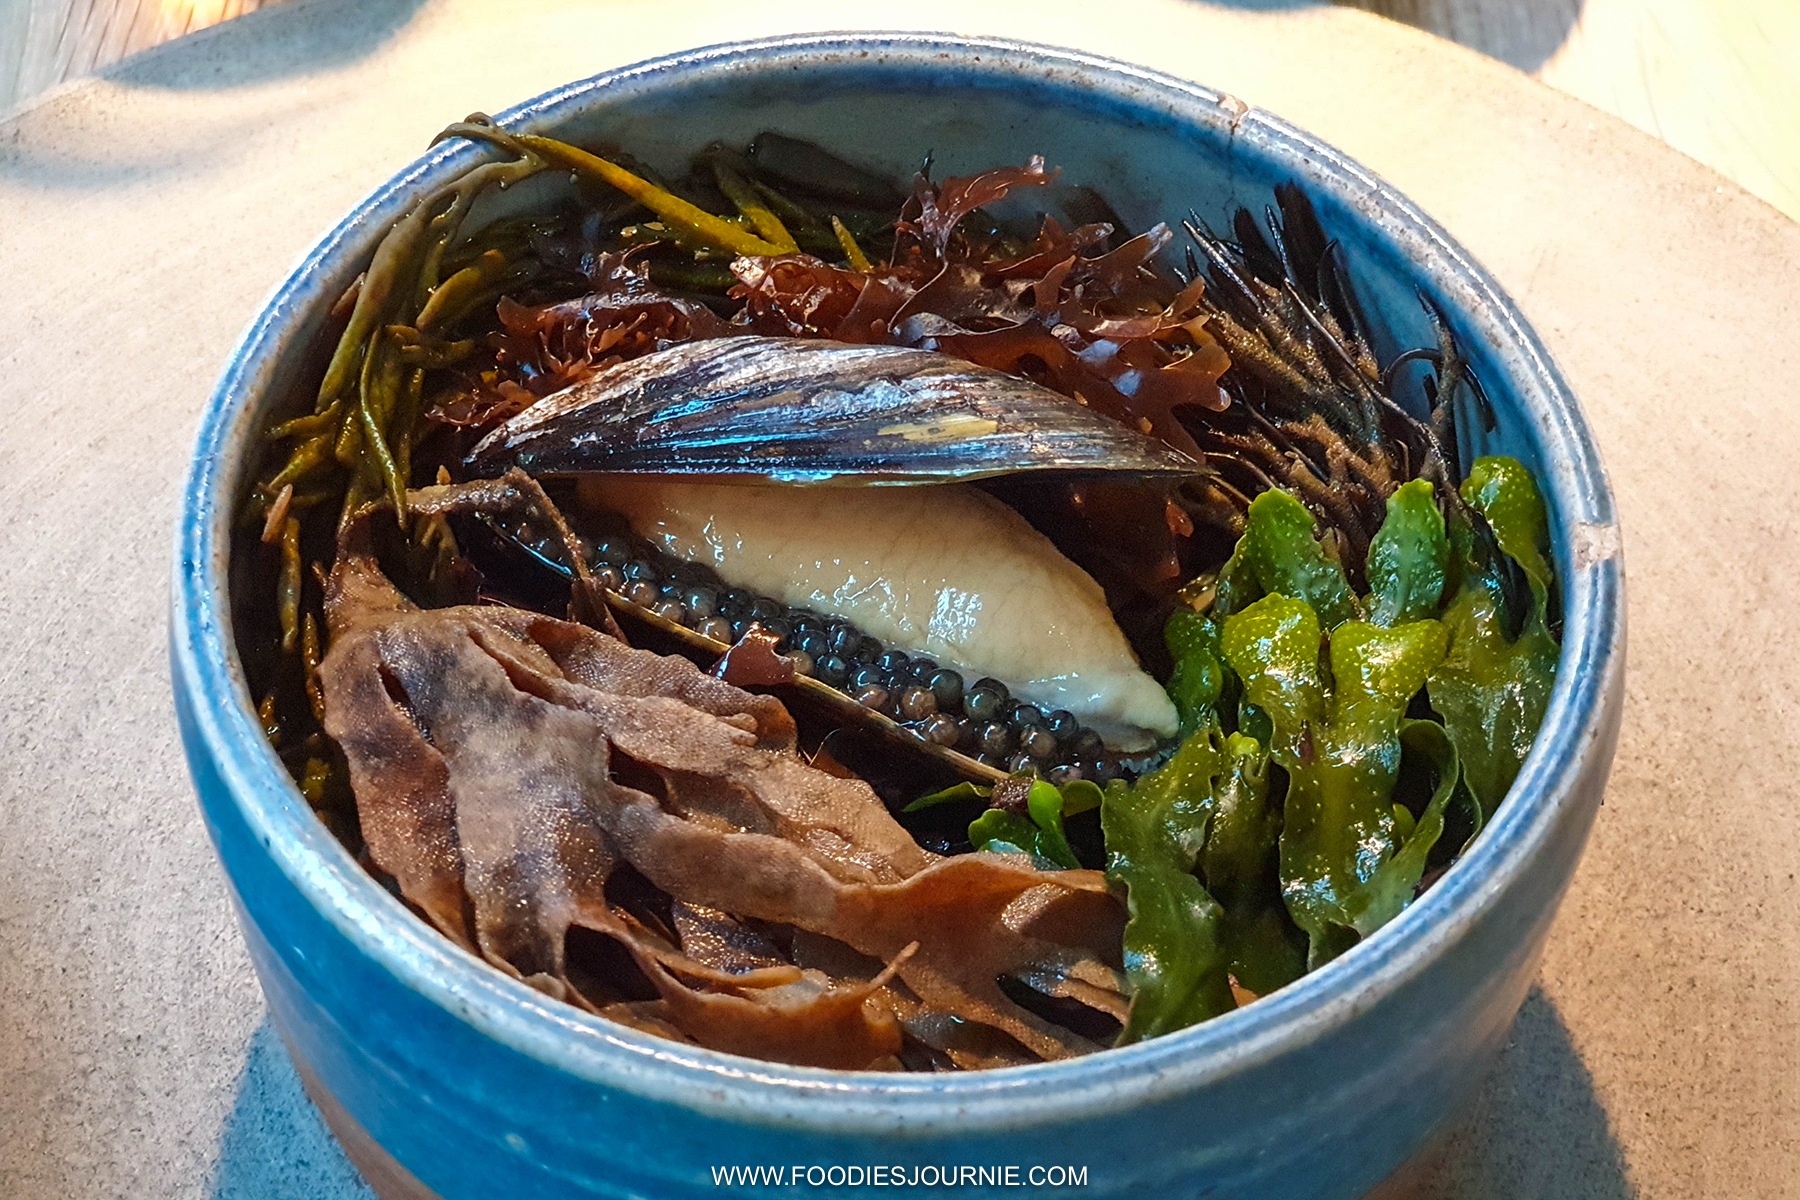 Noma Medium Rare Blue Shell Mussel with Seaweed Soup